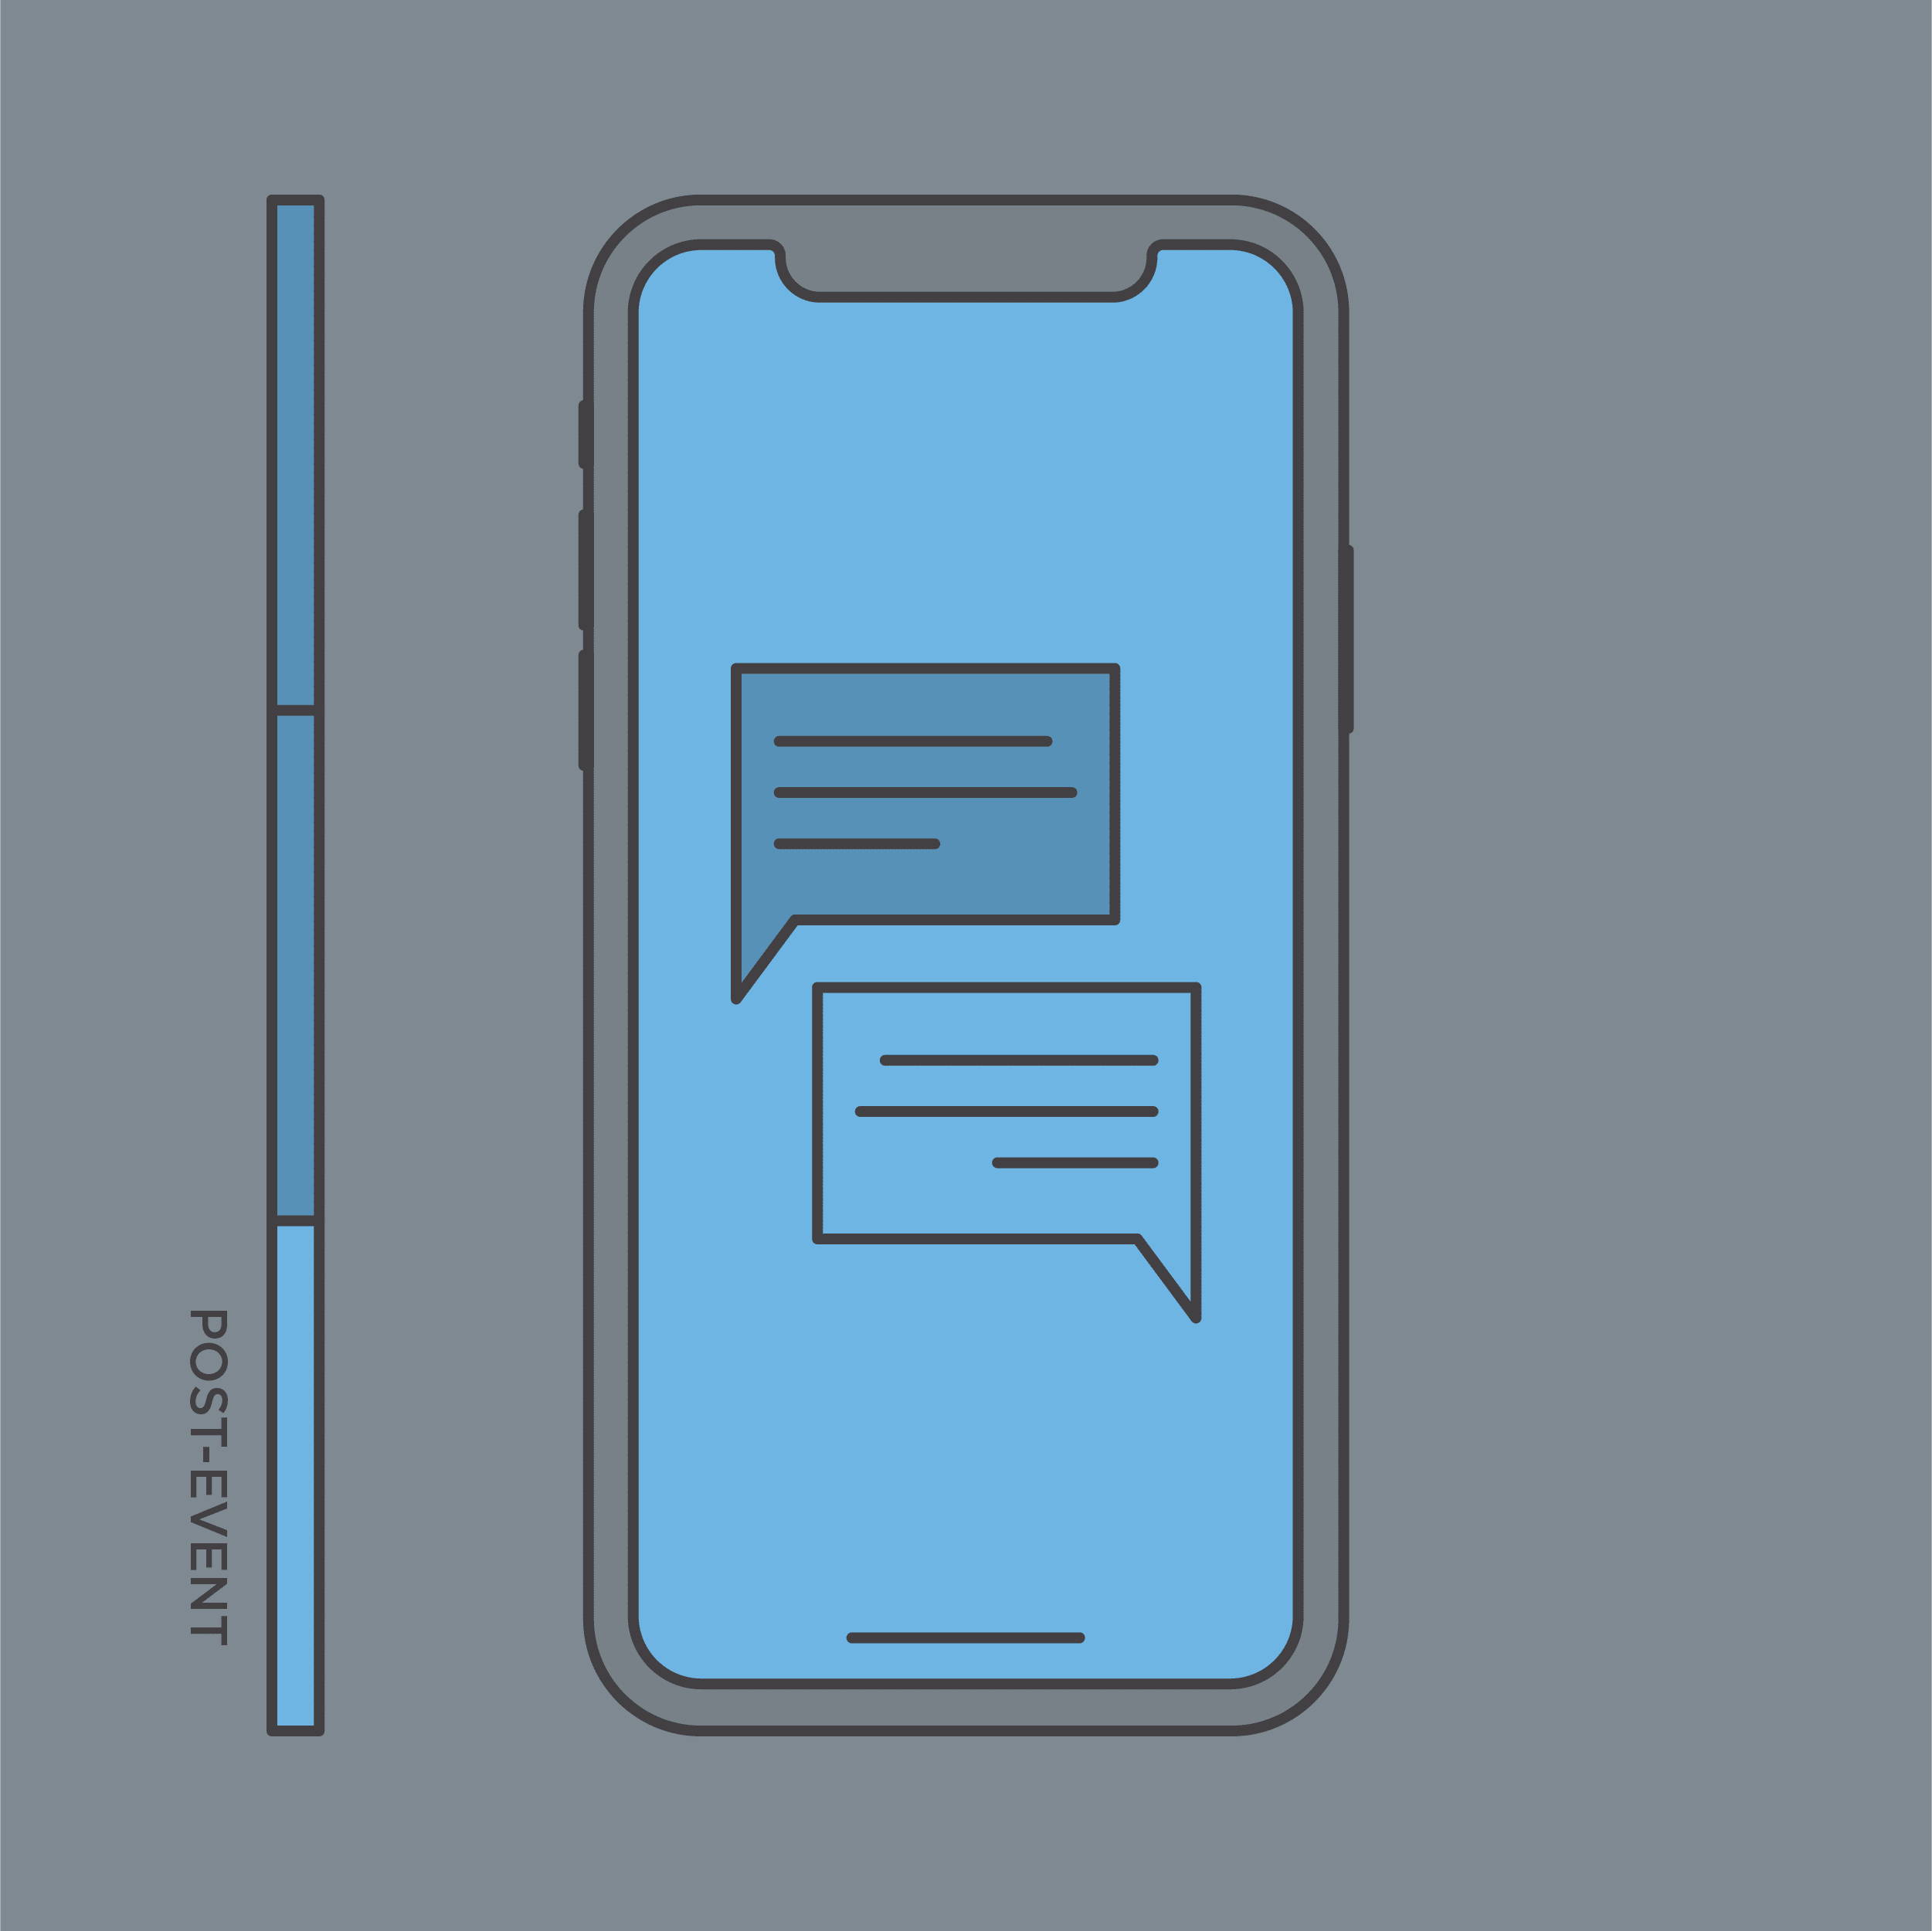 Post Event Icon showing phone and dialog box